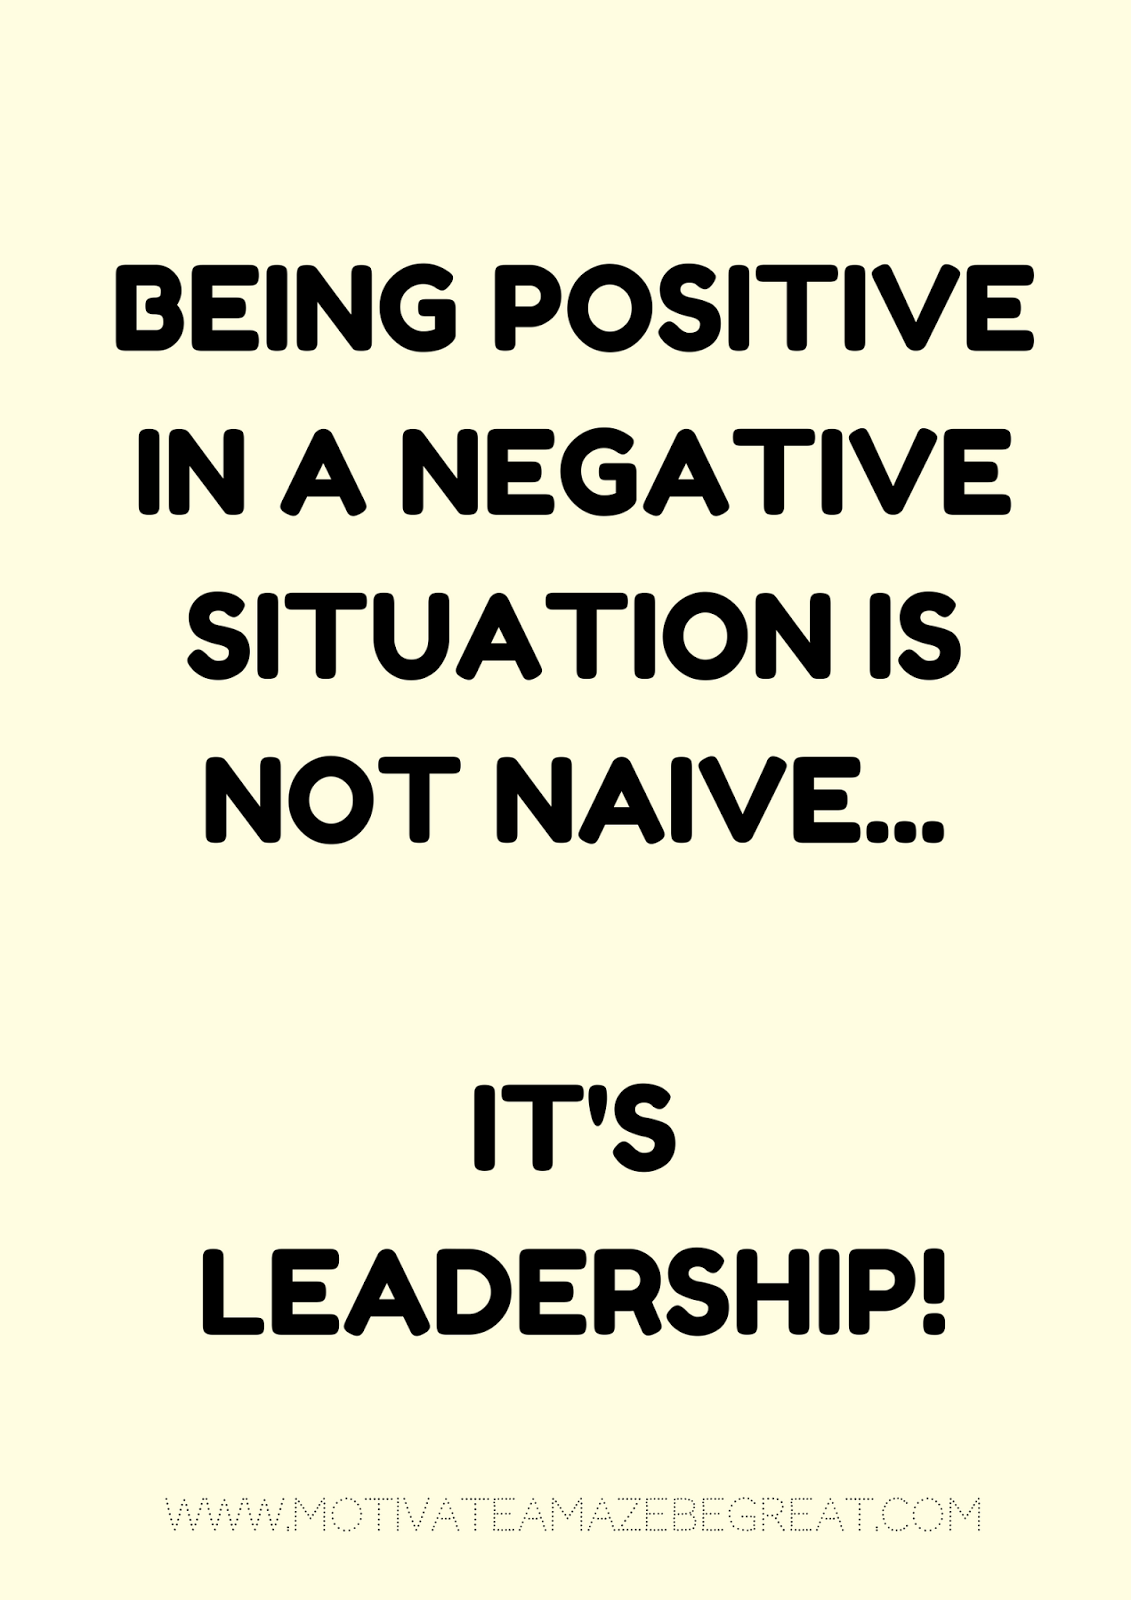 27 Self Motivation Quotes And Posters For Success "Being positive in a negative situation